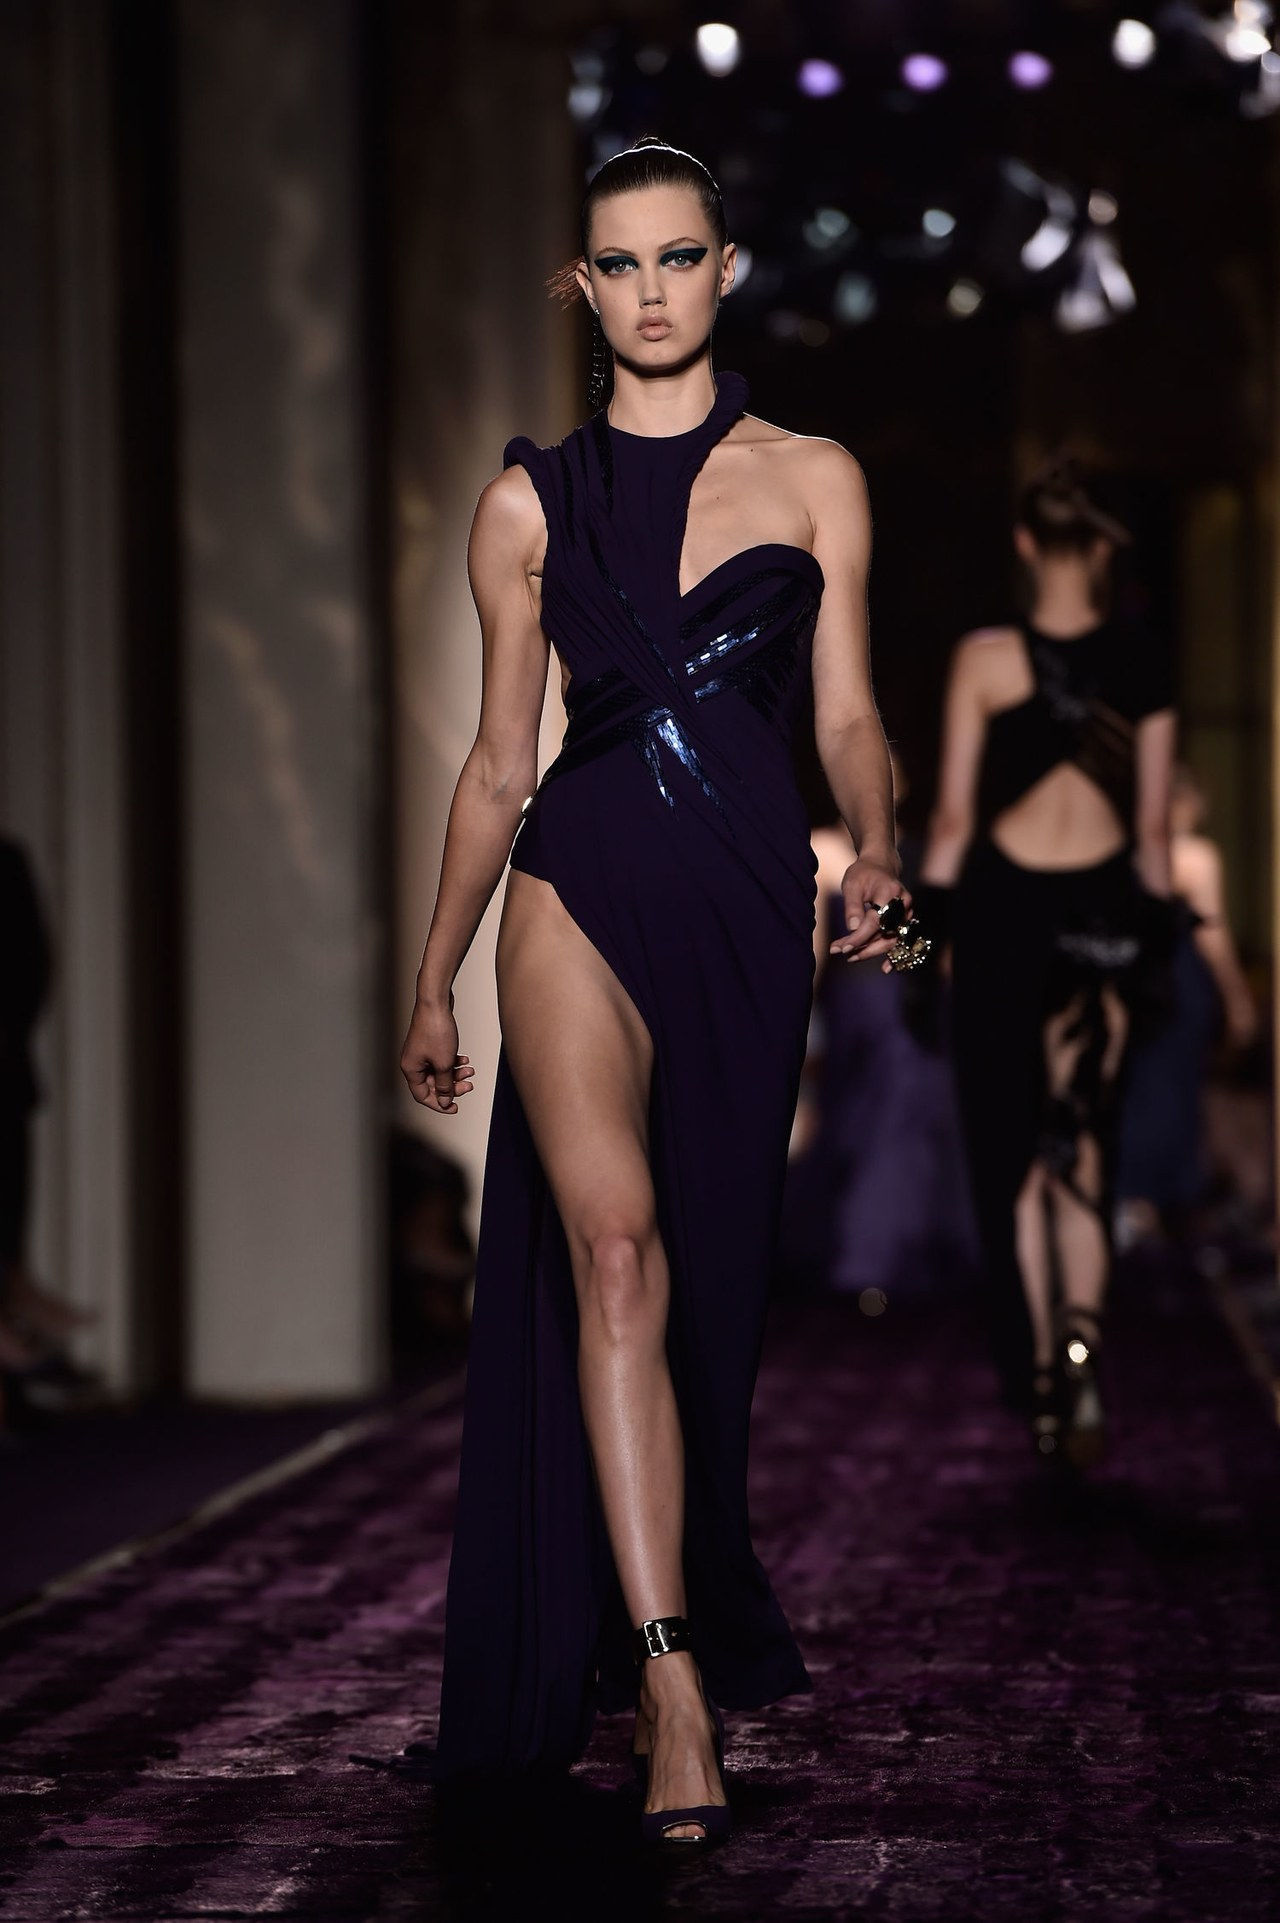 versace couture show lindsey wixon high slit dress